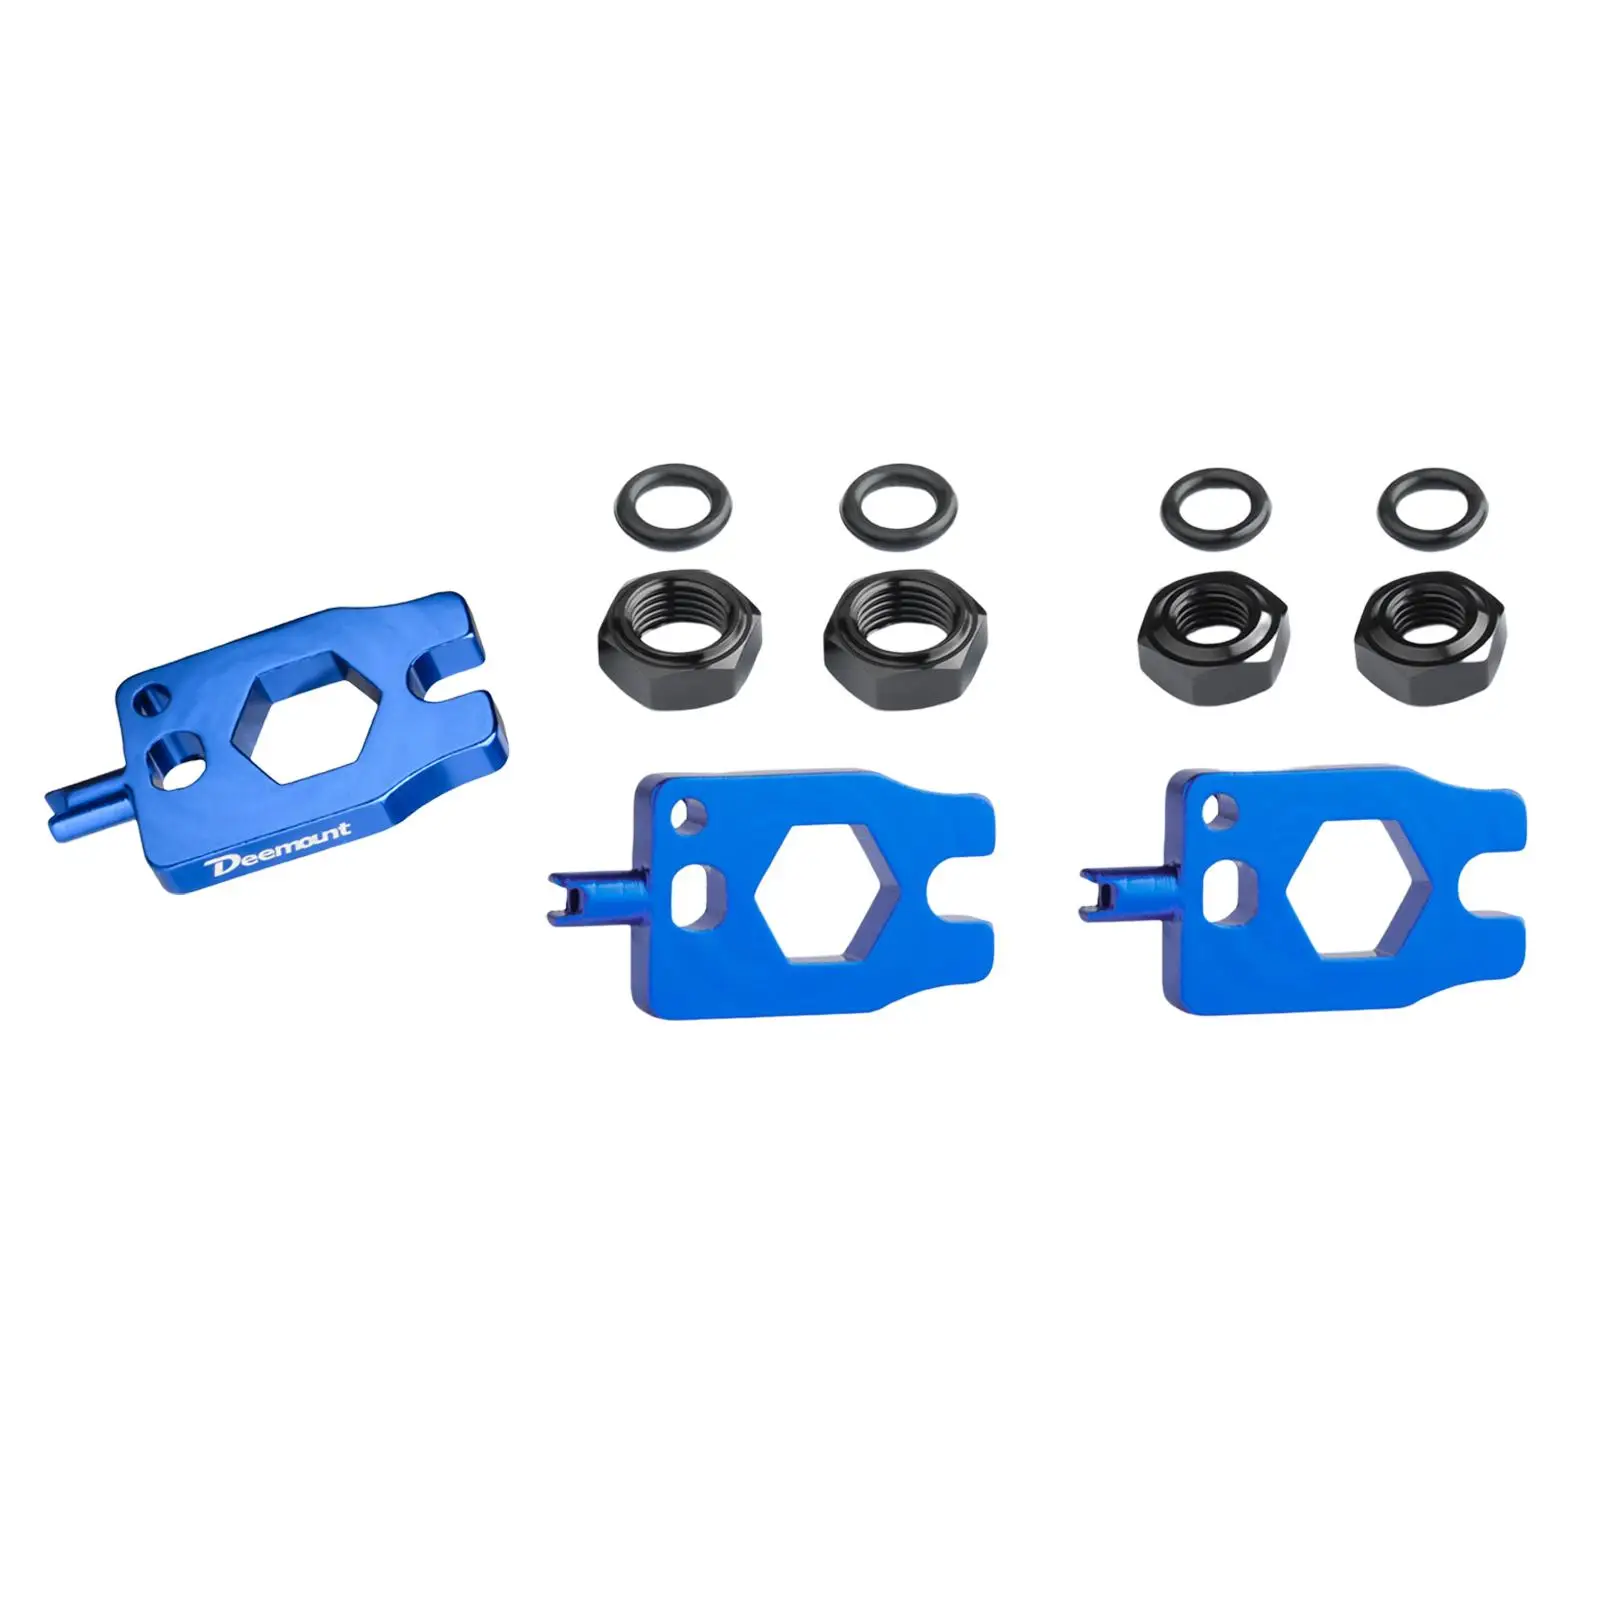 4 in 1 Repair Bicycle Valve Wrench Multifunction Valve Core Disassembly Tool